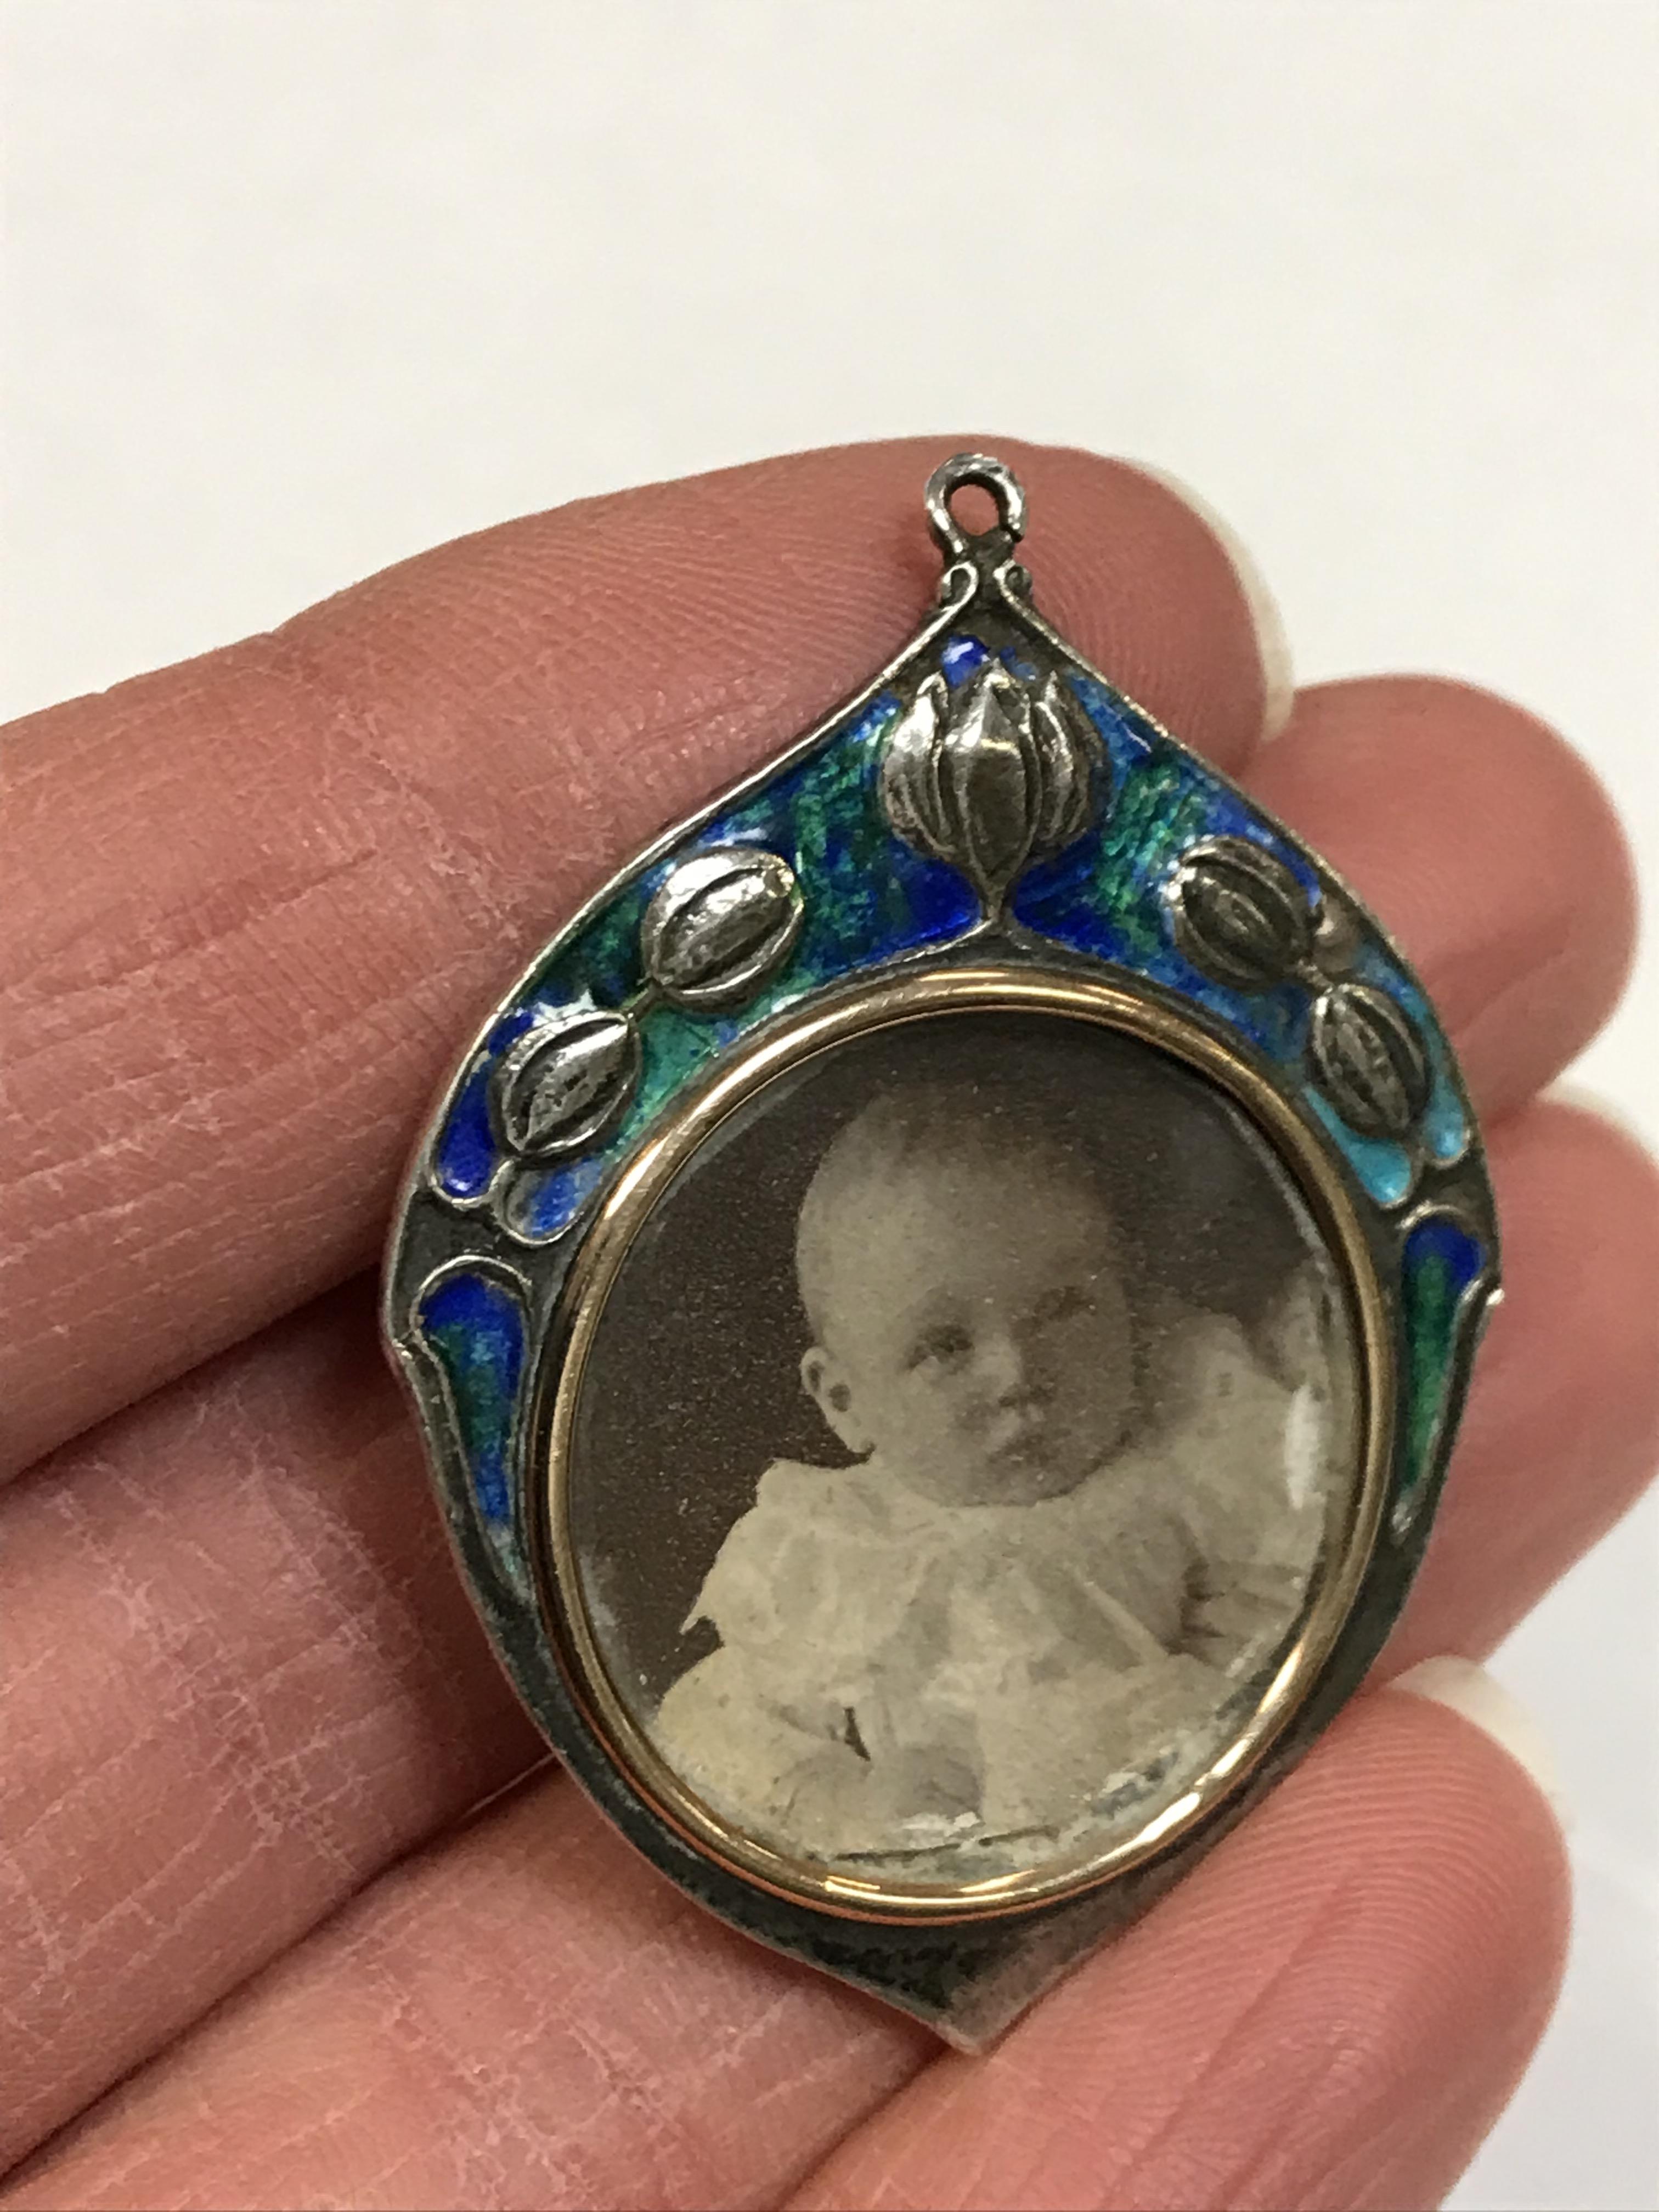 An Edwardian silver and enamel decorated pendant set with pendant locket (by William Hair Haseler, - Image 5 of 11